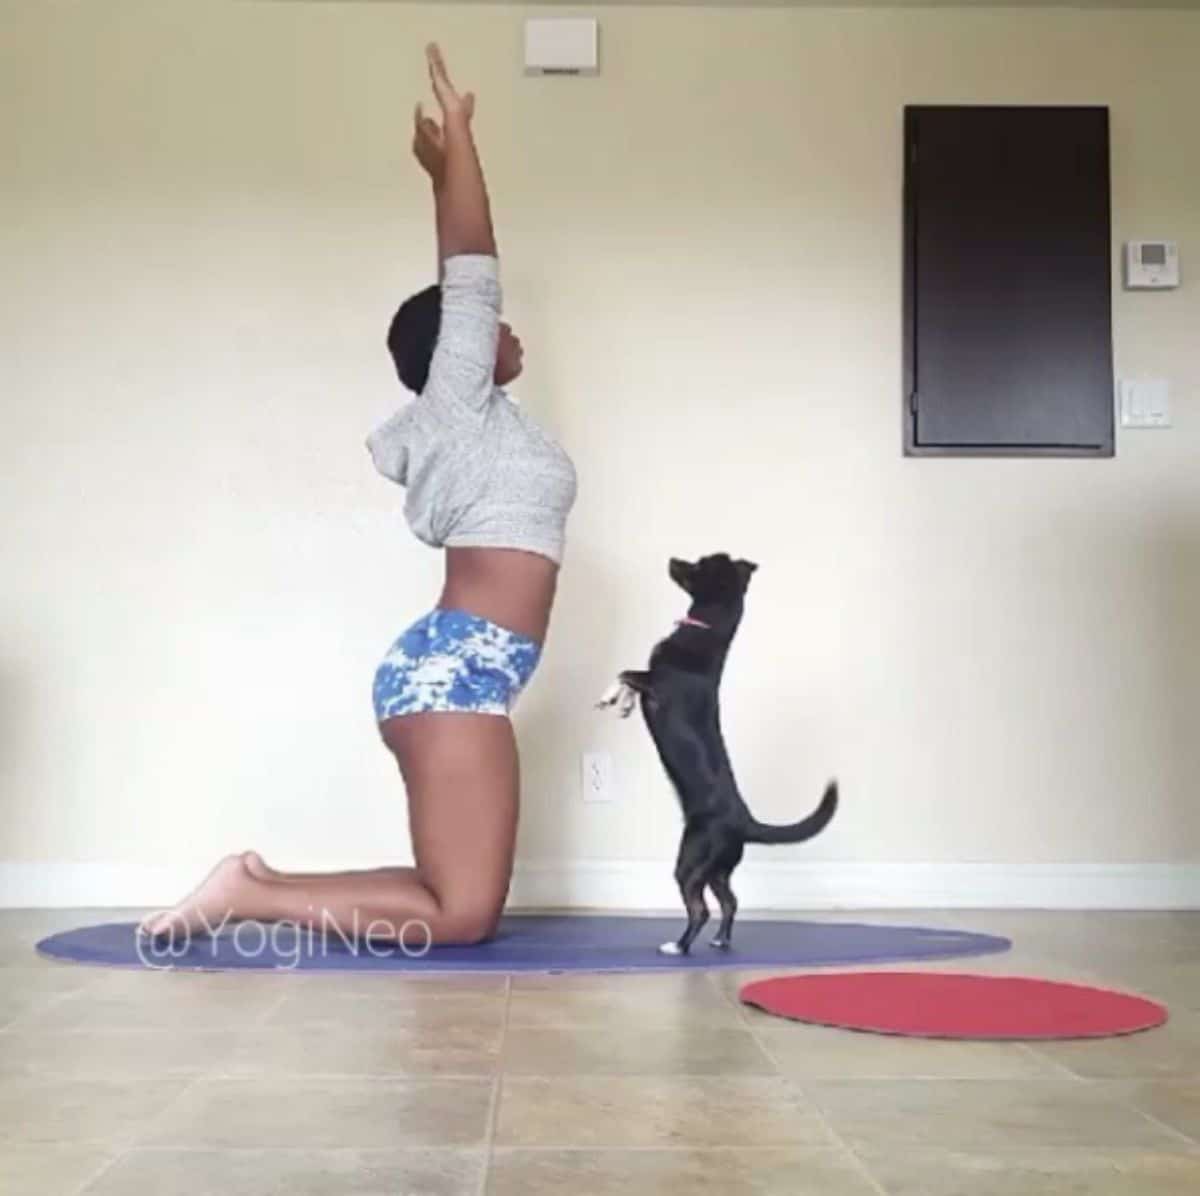 small black dog with white paws standing on hind legs in front of a woman stretching her arms upwards